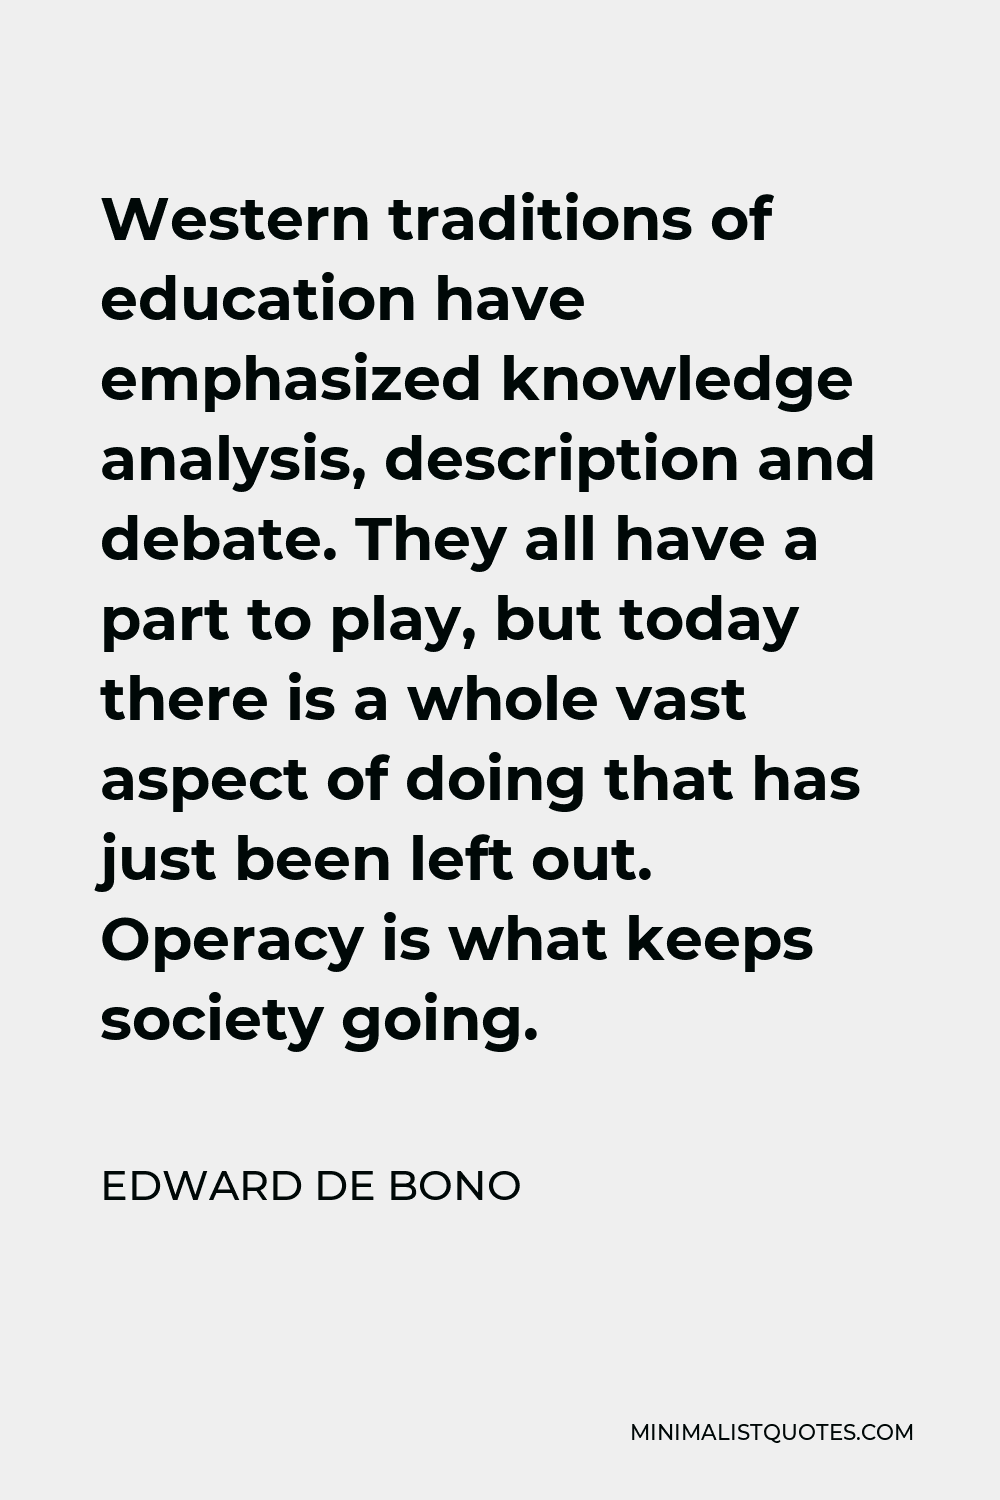 Edward de Bono Quote - Western traditions of education have emphasized knowledge analysis, description and debate. They all have a part to play, but today there is a whole vast aspect of doing that has just been left out. Operacy is what keeps society going.